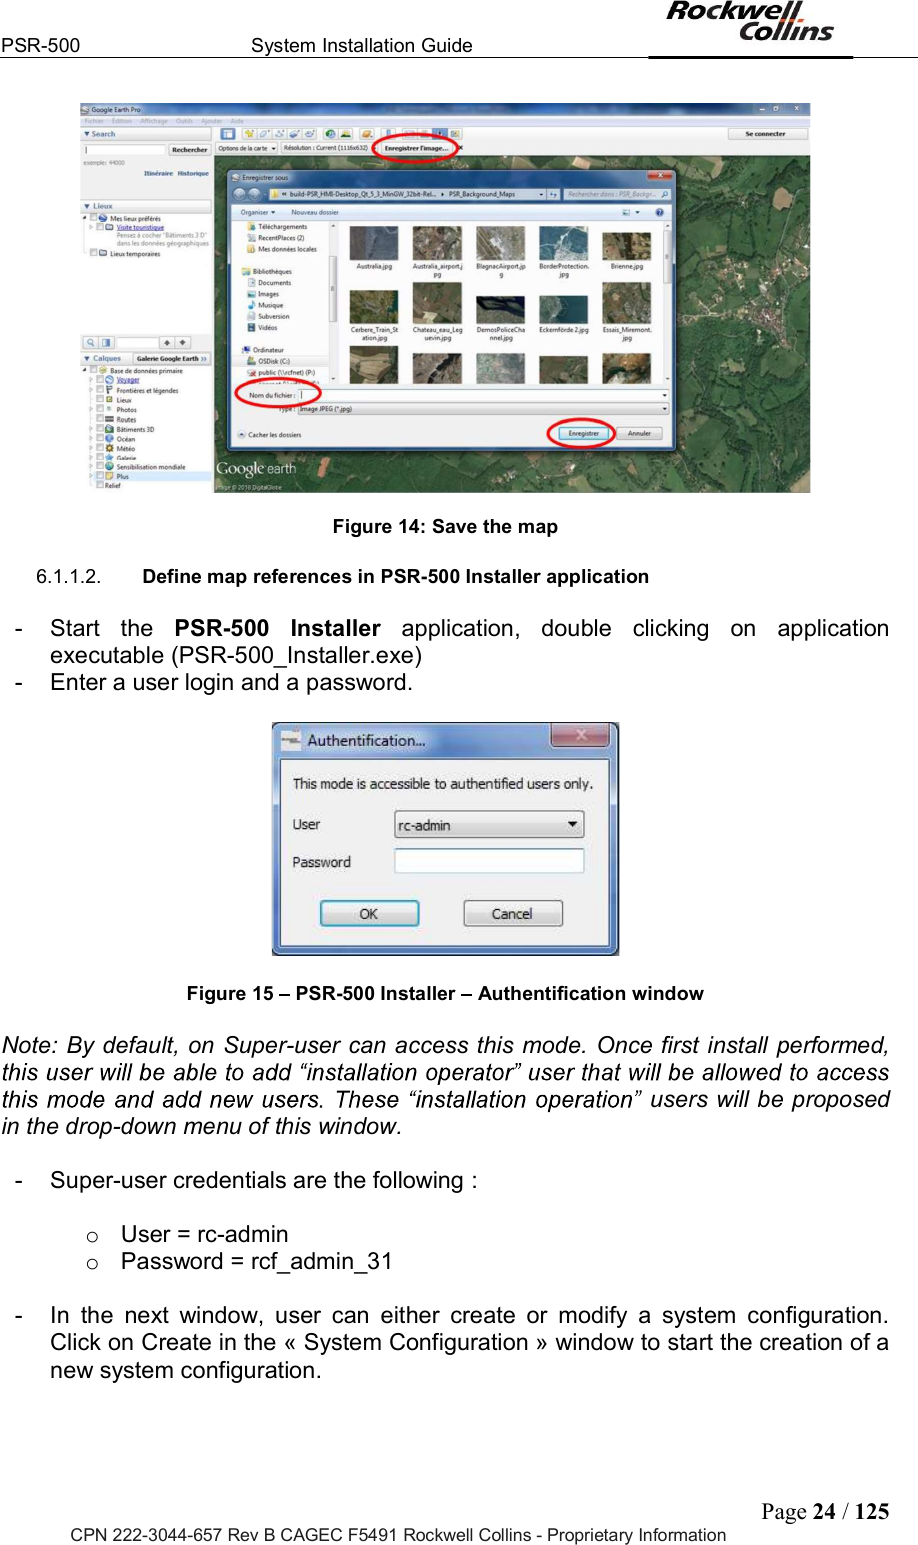 PSR-500  System Installation Guide  Page 24 / 125 CPN 222-3044-657 Rev B CAGEC F5491 Rockwell Collins - Proprietary Information   Figure 14: Save the map  6.1.1.2.  Define map references in PSR-500 Installer application  -  Start  the  PSR-500  Installer  application,  double  clicking  on  application executable (PSR-500_Installer.exe) -  Enter a user login and a password.     Figure 15   PSR-500 Installer   Authentification window  Note: By default, on Super-user can access this mode. Once first install performed, users will be proposed in the drop-down menu of this window.   -  Super-user credentials are the following :   o  User = rc-admin o  Password = rcf_admin_31   -  In  the  next  window,  user  can  either  create  or  modify  a  system  configuration. Click on Create in the « System Configuration » window to start the creation of a new system configuration.   